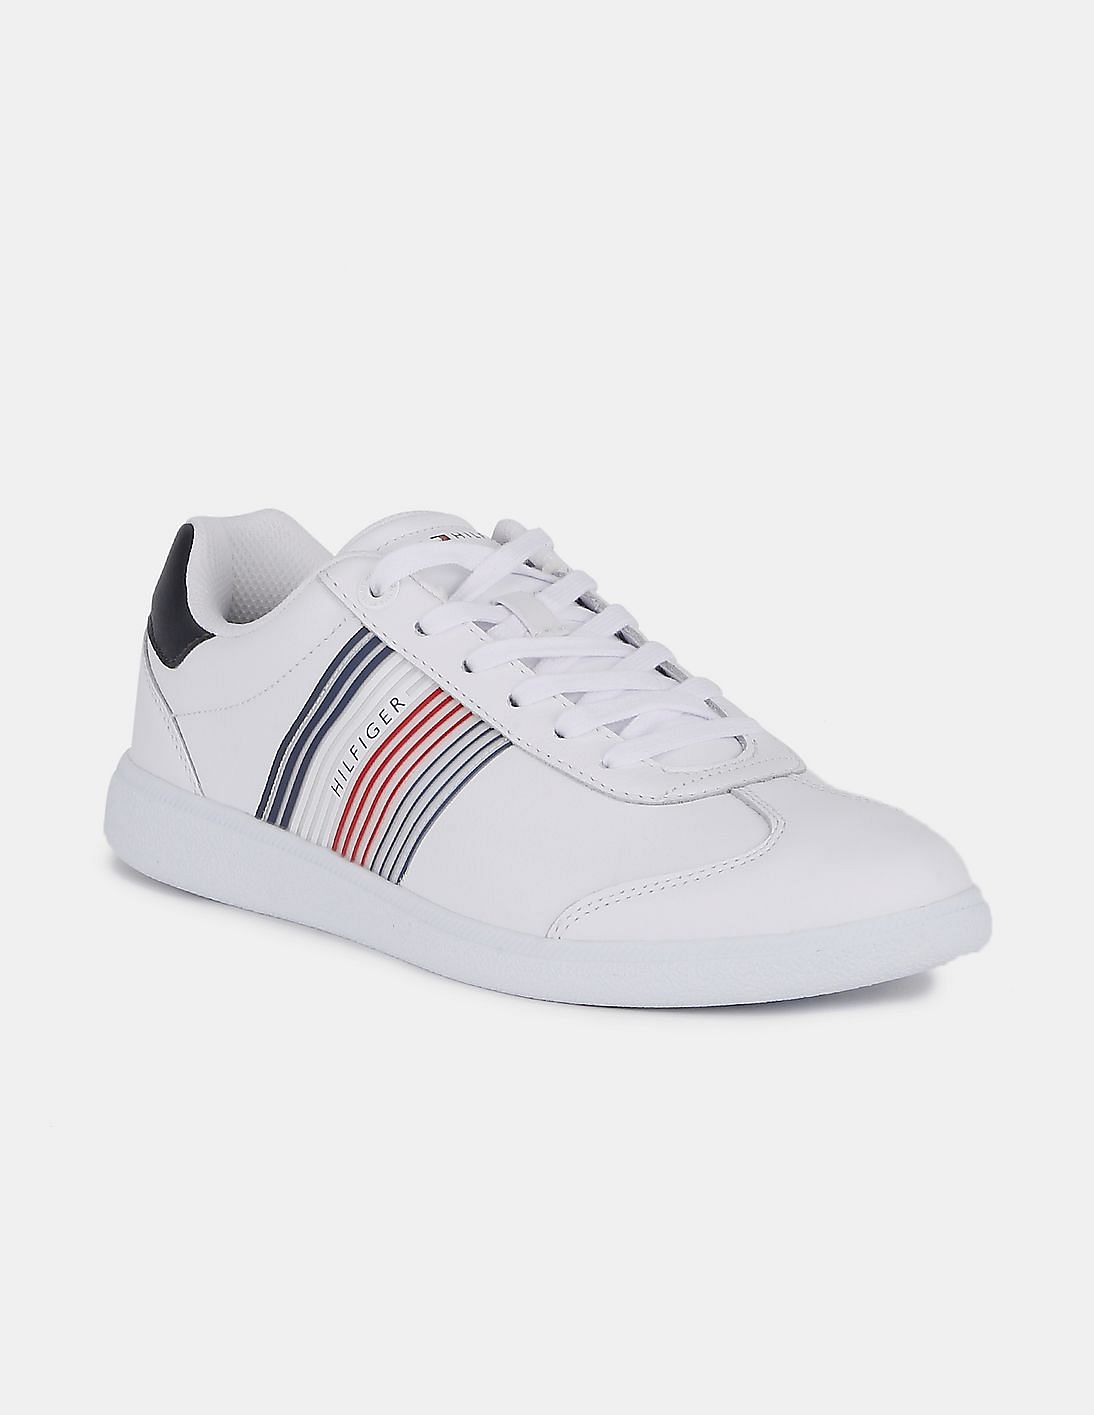 Buy Tommy Hilfiger Men White Essential Corporate Sneakers - NNNOW.com